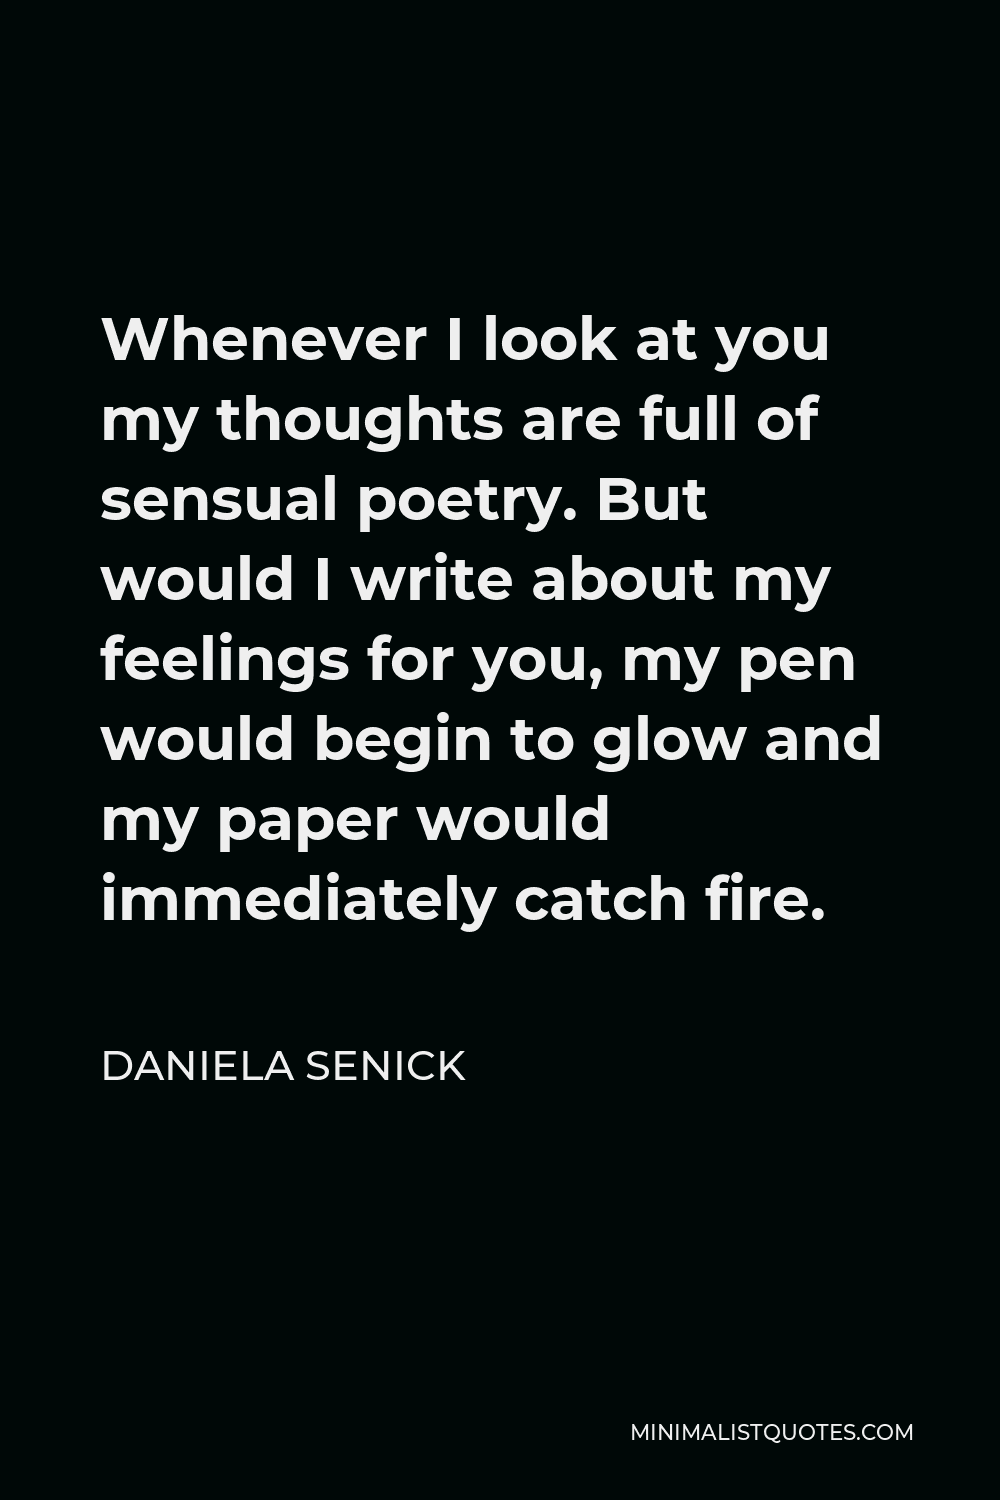 Daniela Senick Quote - Whenever I look at you my thoughts are full of sensual poetry. But would I write about my feelings for you, my pen would begin to glow and my paper would immediately catch fire.